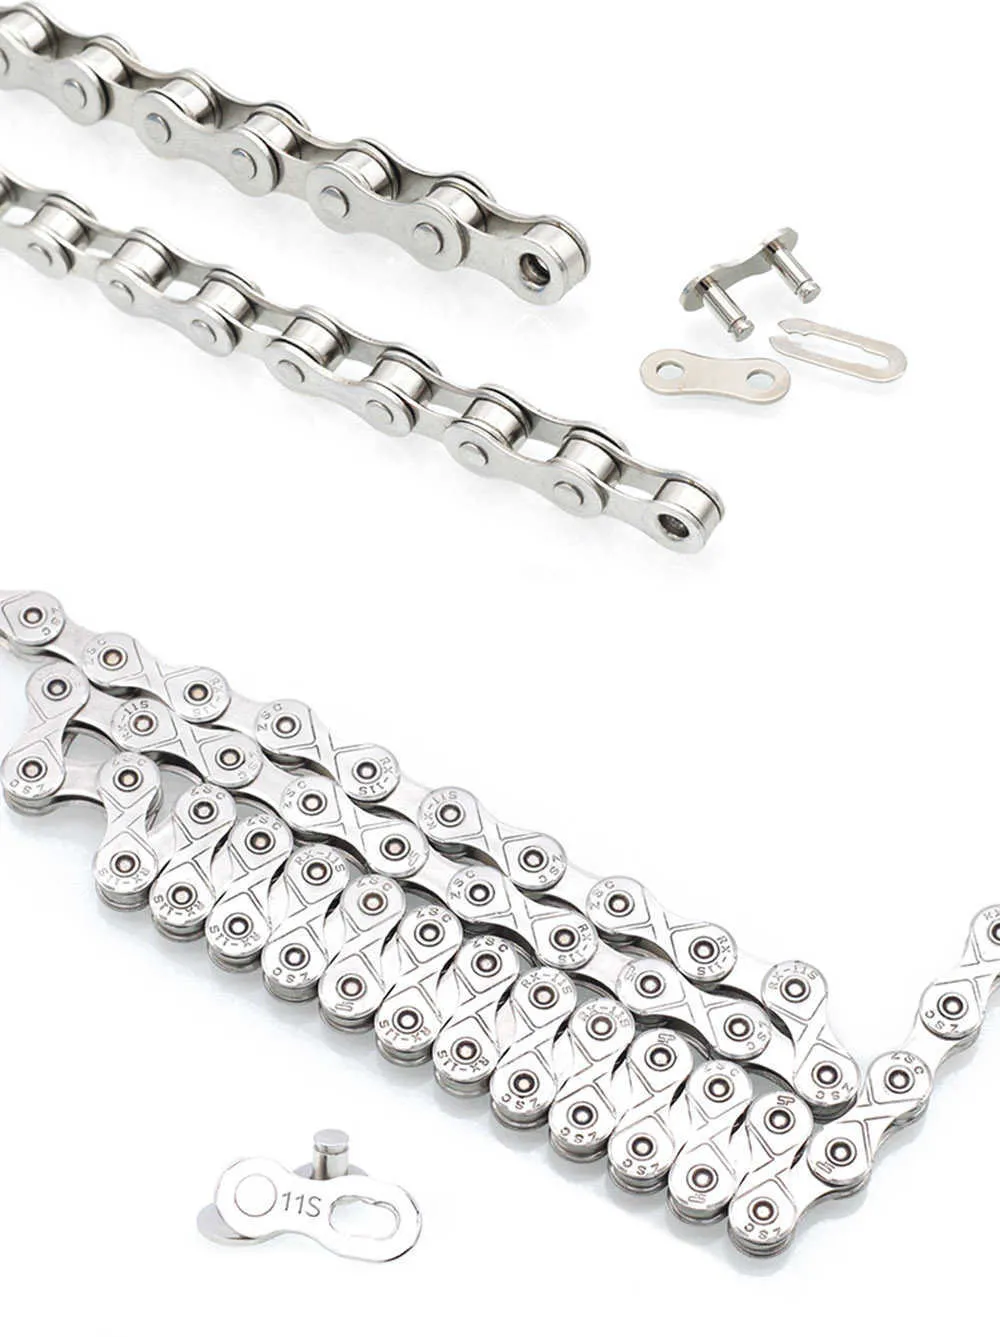 6 7 8 9 10 11 Speed Bicycle Chain 116 Links MTB Mountain Road Bike Stainless Steel Chains Plating Cycling Accessories BC0577 (9)